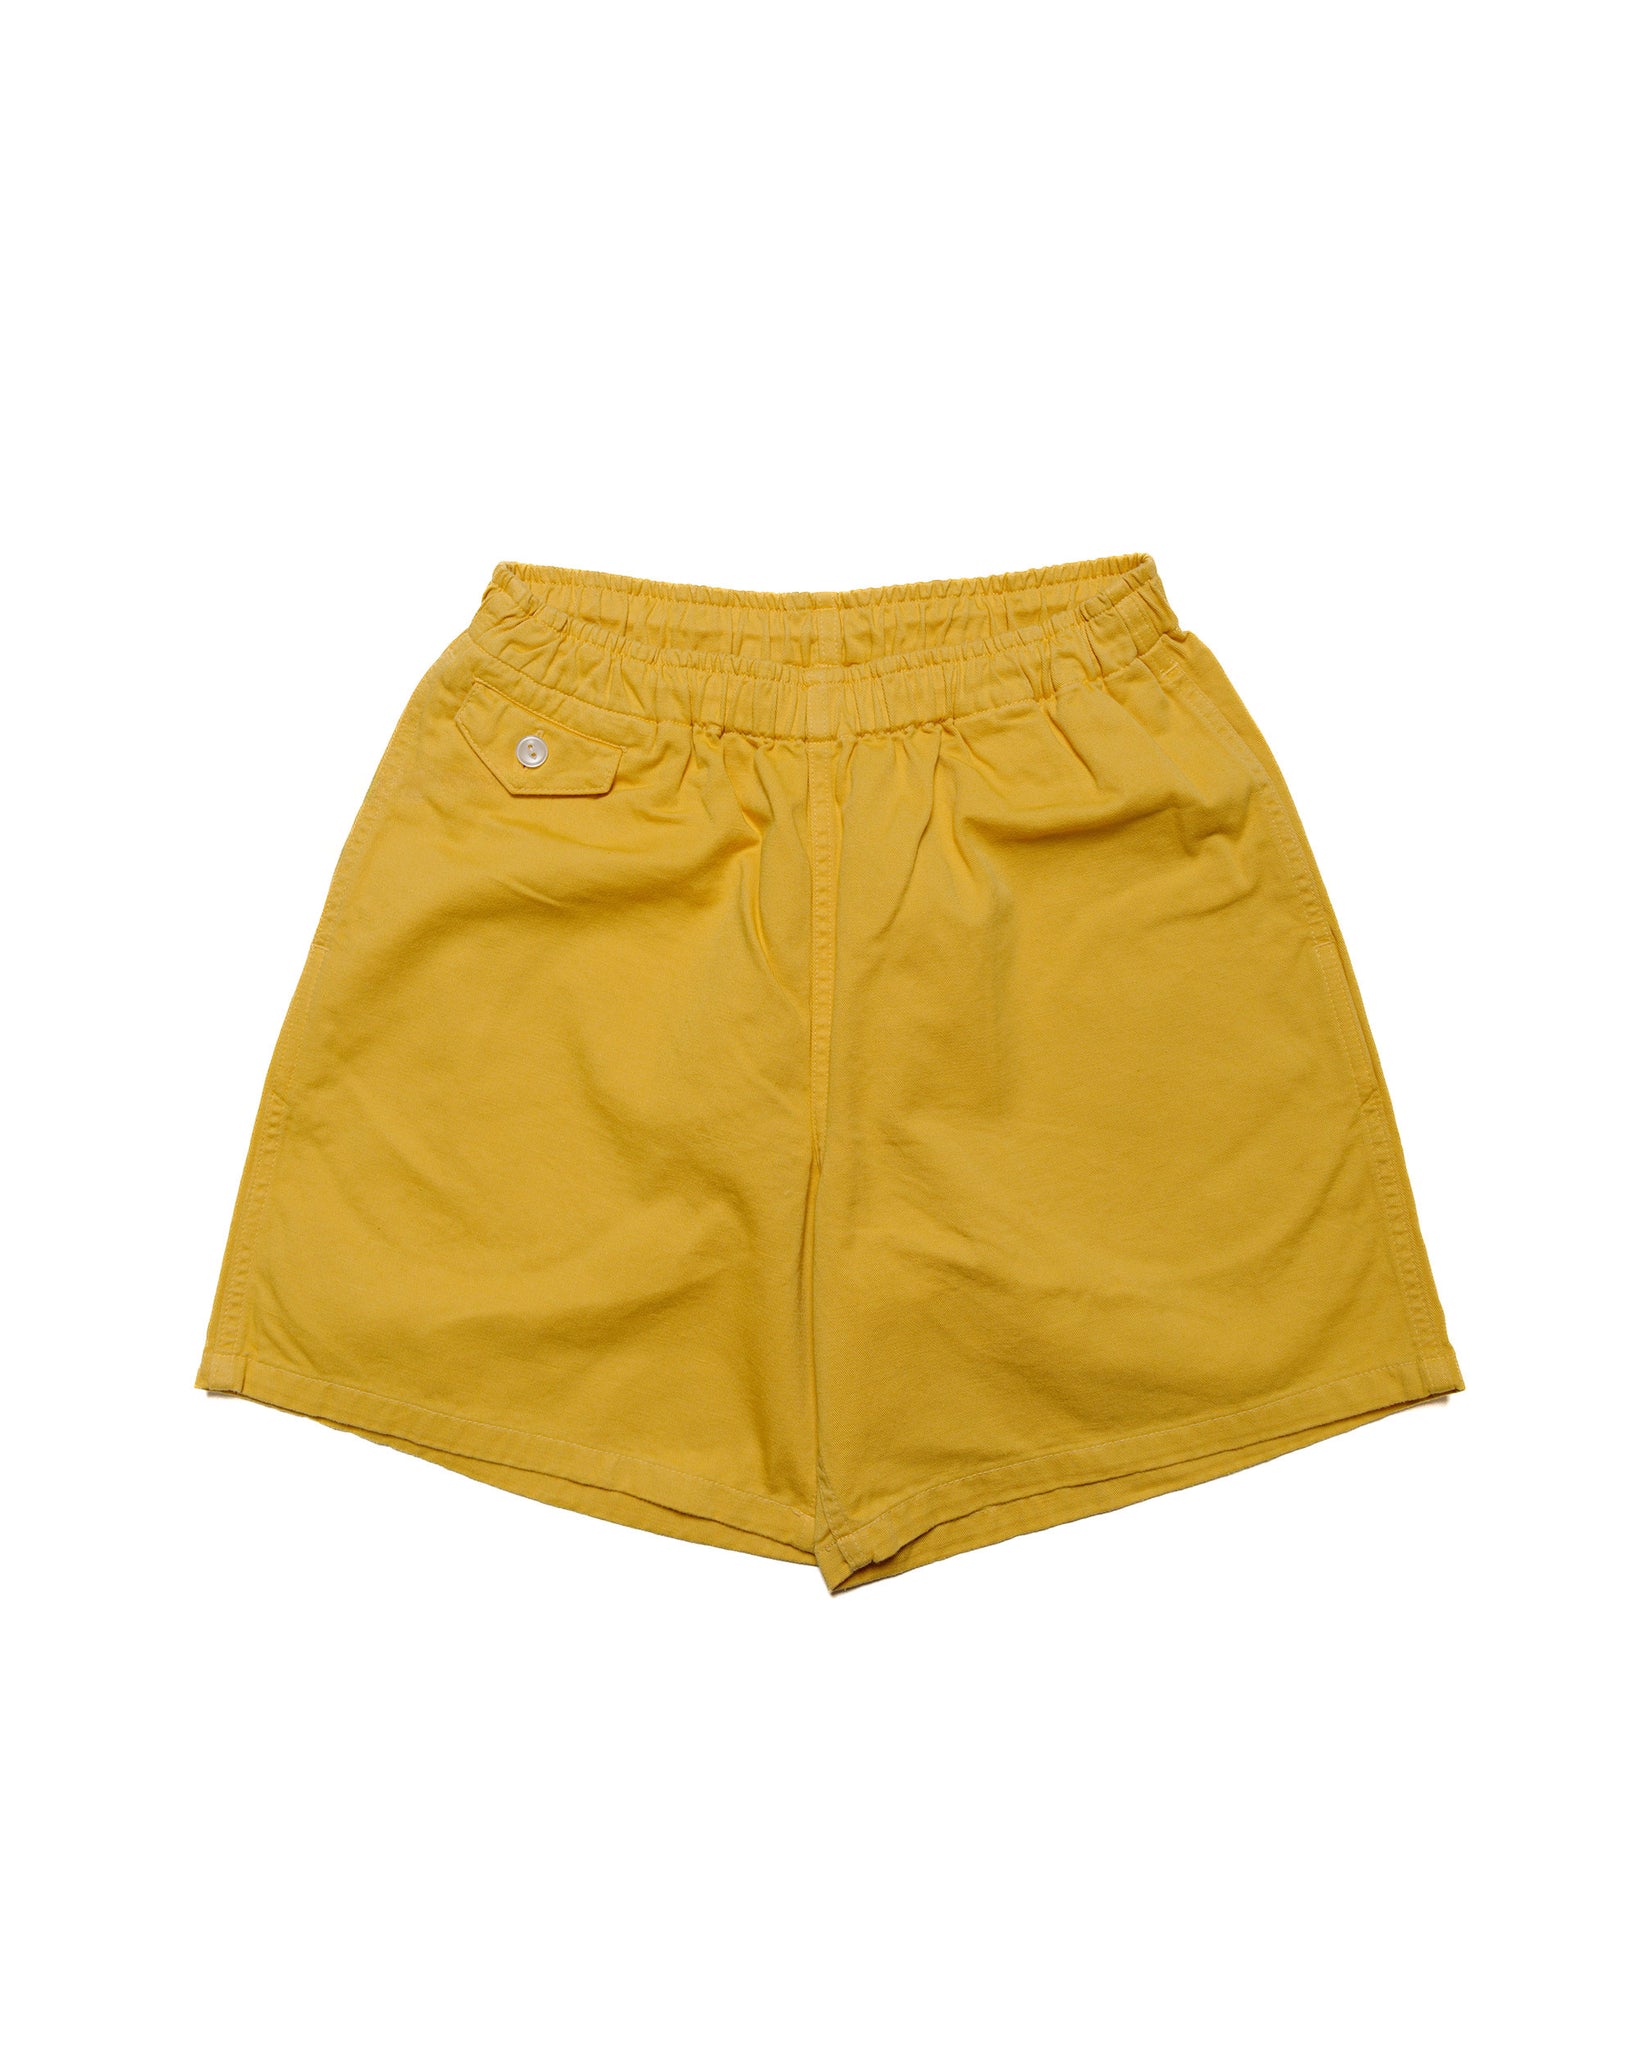 The Real McCoy's MP22015 Cotton Drill Swim Shorts (Over-Dyed) Yellow